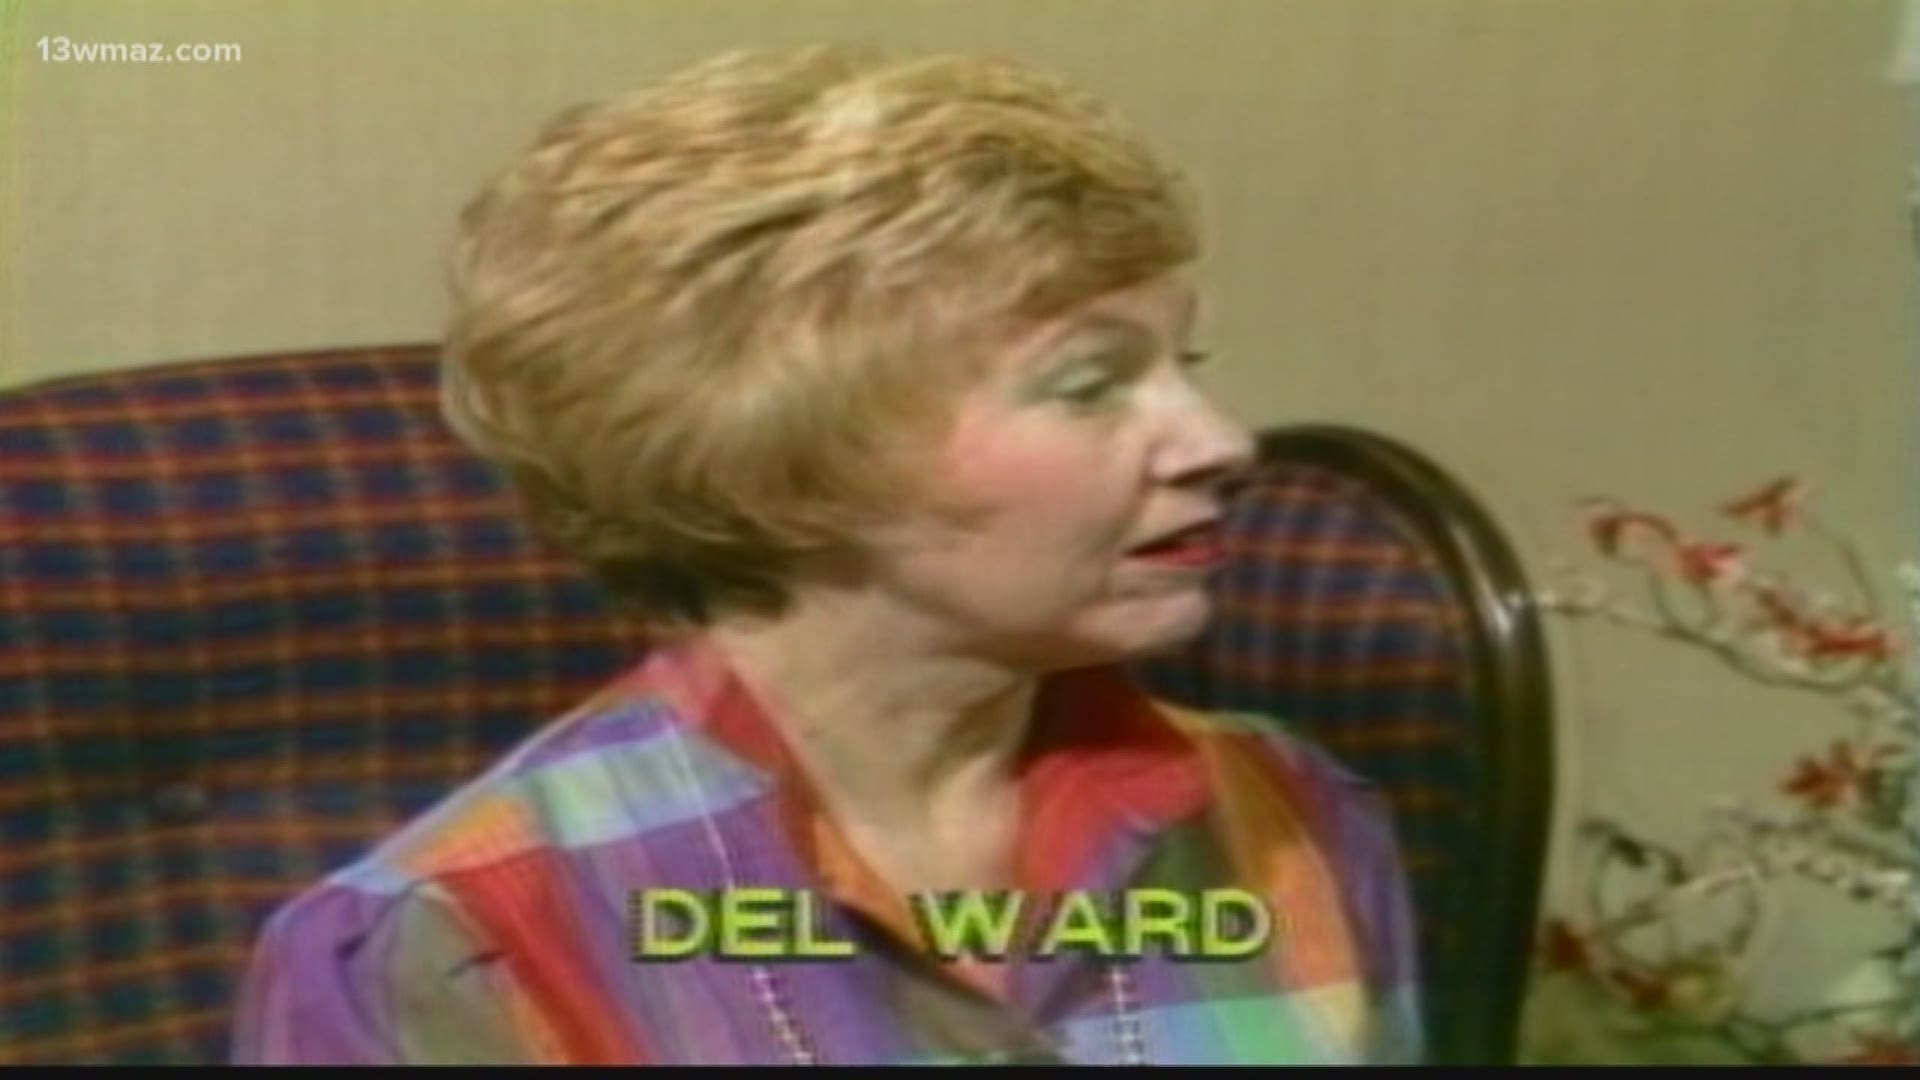 For nearly 70 years, she's been on the air at 13WMAZ. Before that, she broadcasted across the radio waves. Ben Jones got the chance to sit down with a 13WMAZ legend - Del Ward.